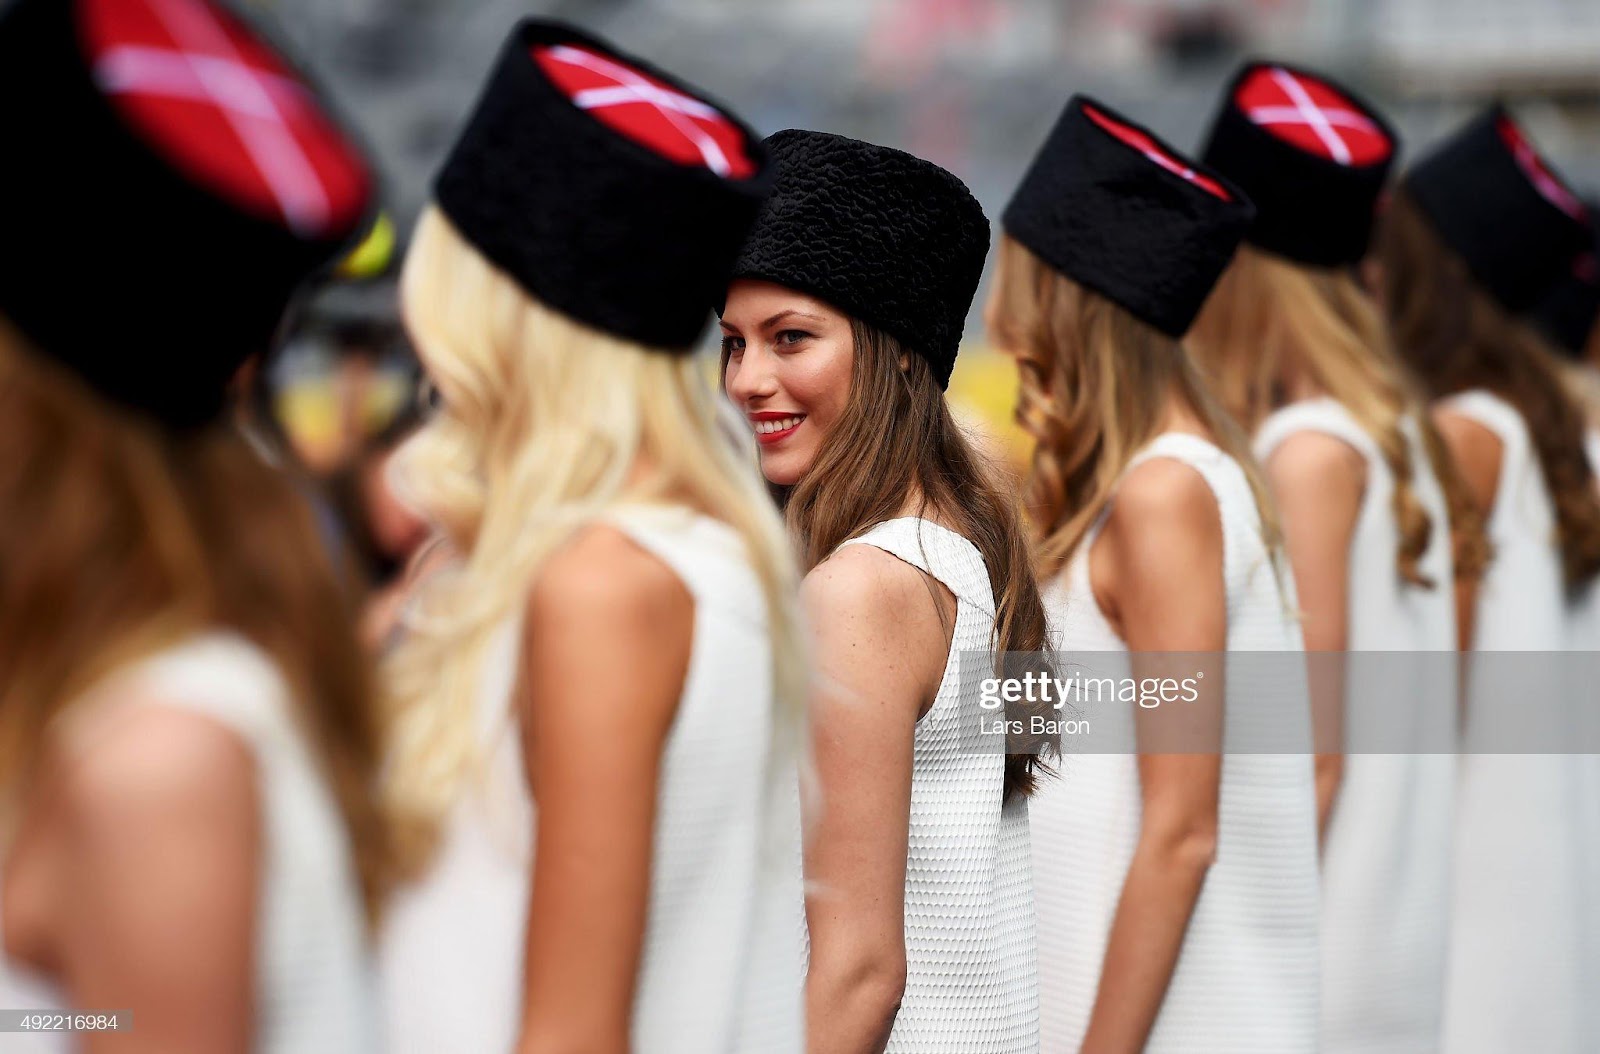 D:\Documenti\posts\posts\Women and motorsport\foto\Getty e altre\grid-girls-pose-during-the-drivers-parade-before-the-formula-one-of-picture-id492216984.jpg